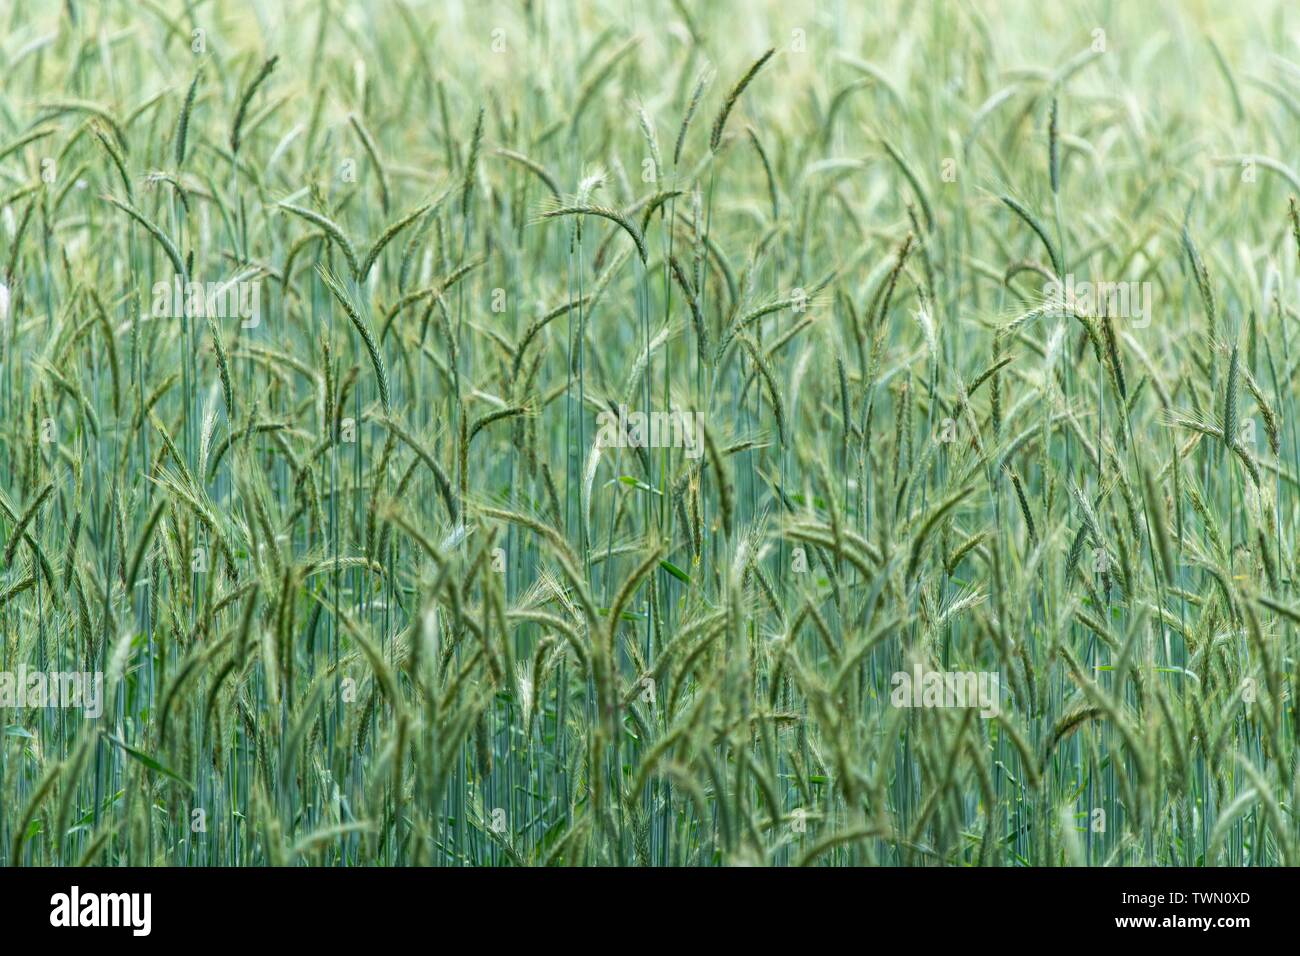 A close up photo of a cereal crop field, UK Stock Photo